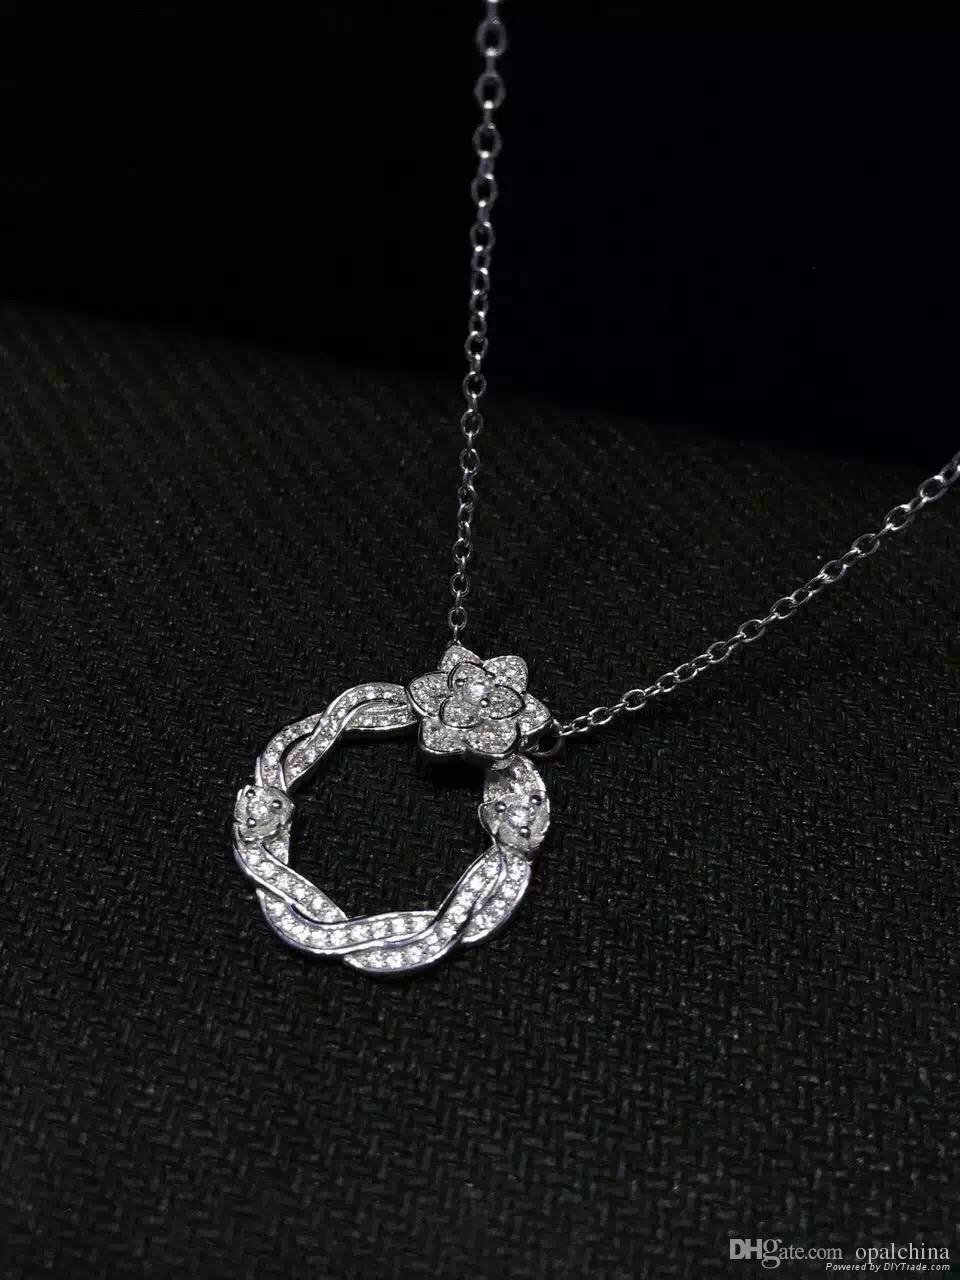 NEFFLY Nice Rose flower 925 Sterling Sliver necklace Women Girls For Party&Gift 